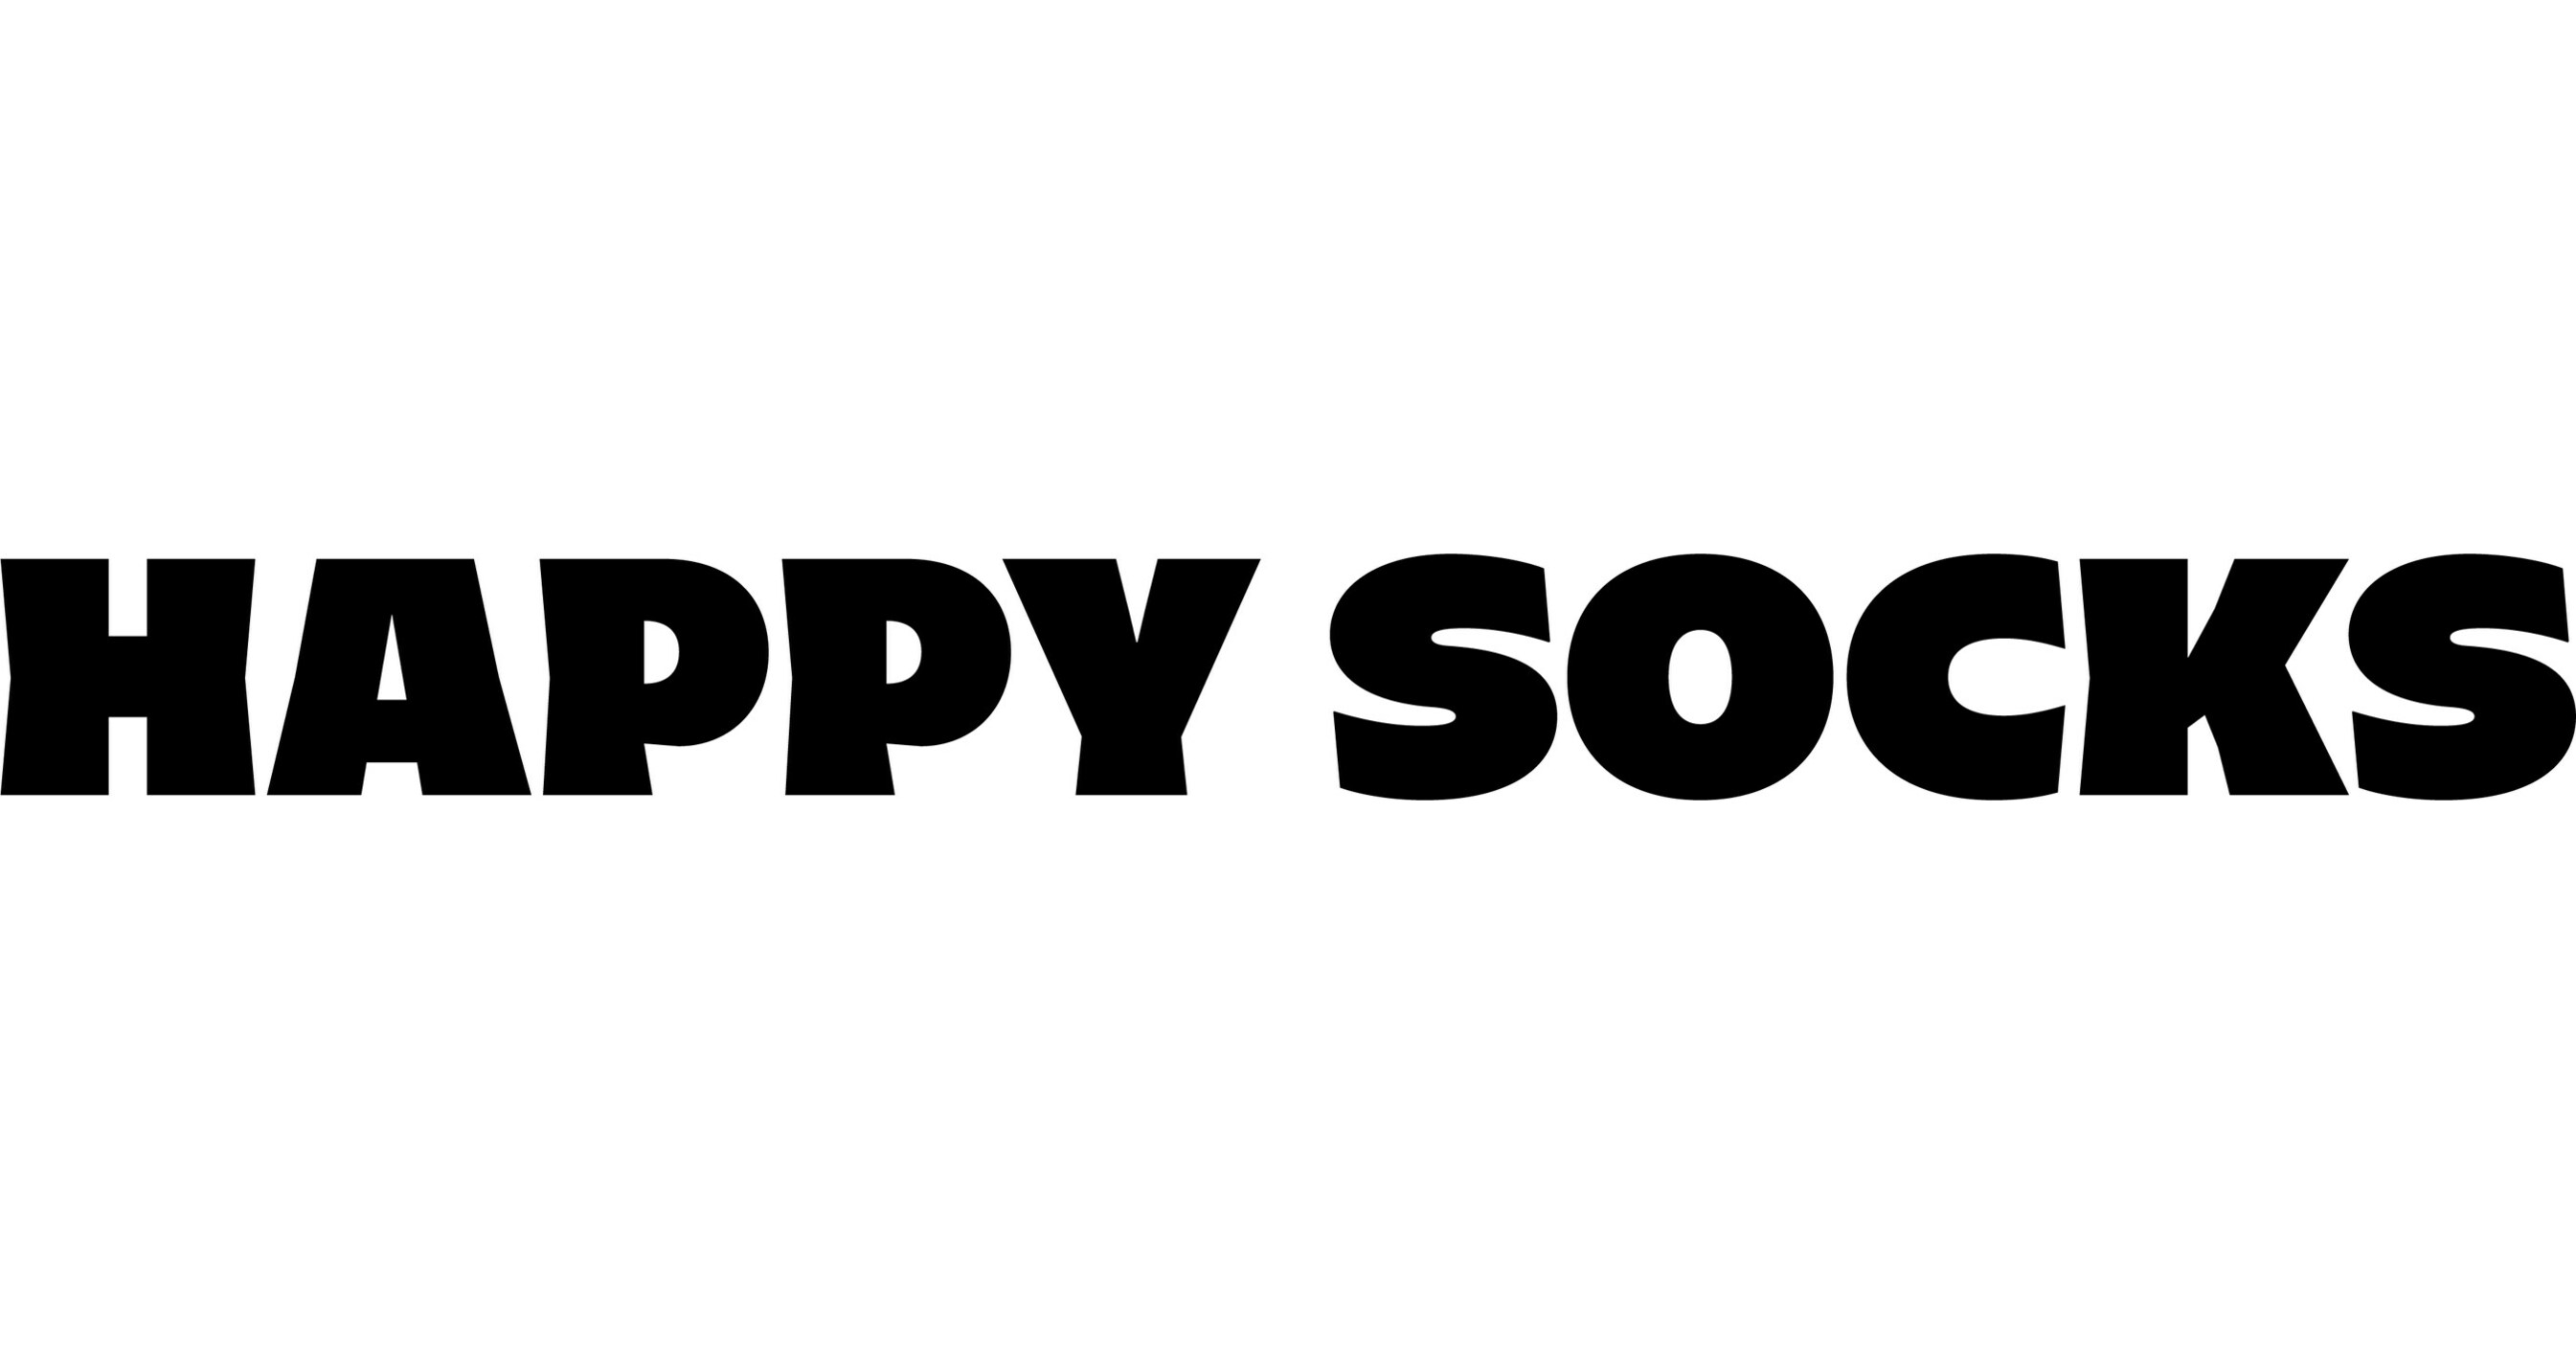 HAPPY SOCKS WELCOMES ALEXANDER MEYER AS NEW CEO